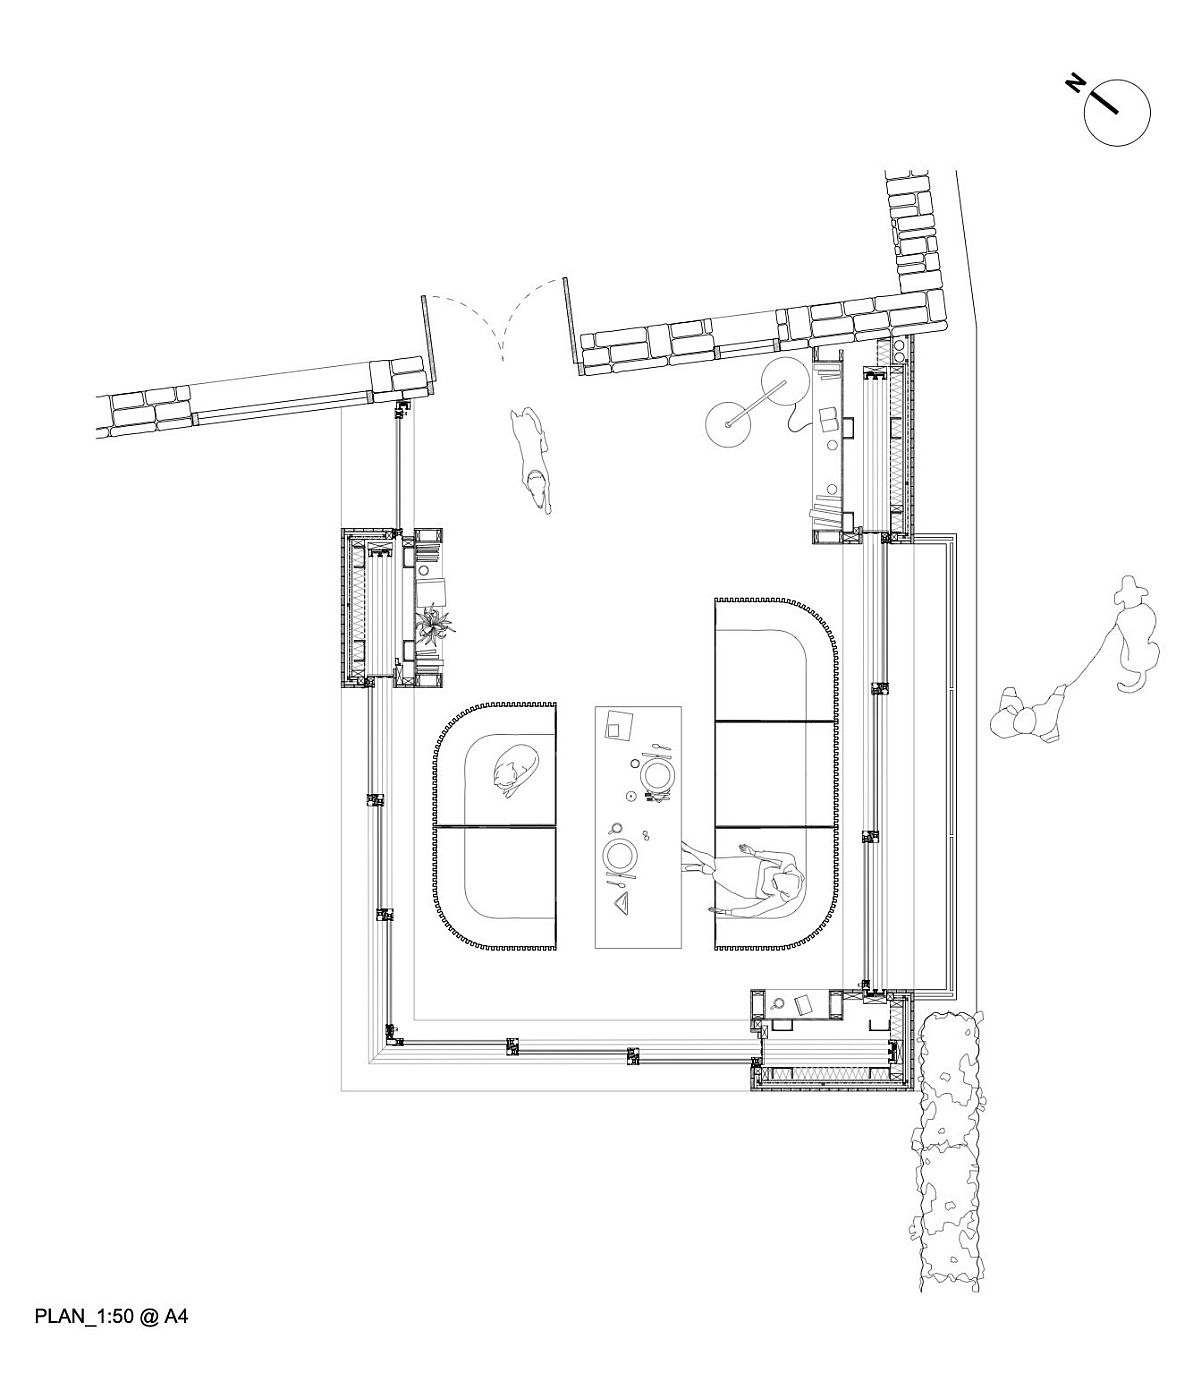 Floor-plan-of-Reading-Room-by-George-King-Architects-brings-modernity-to-a-classic-cottage-63486